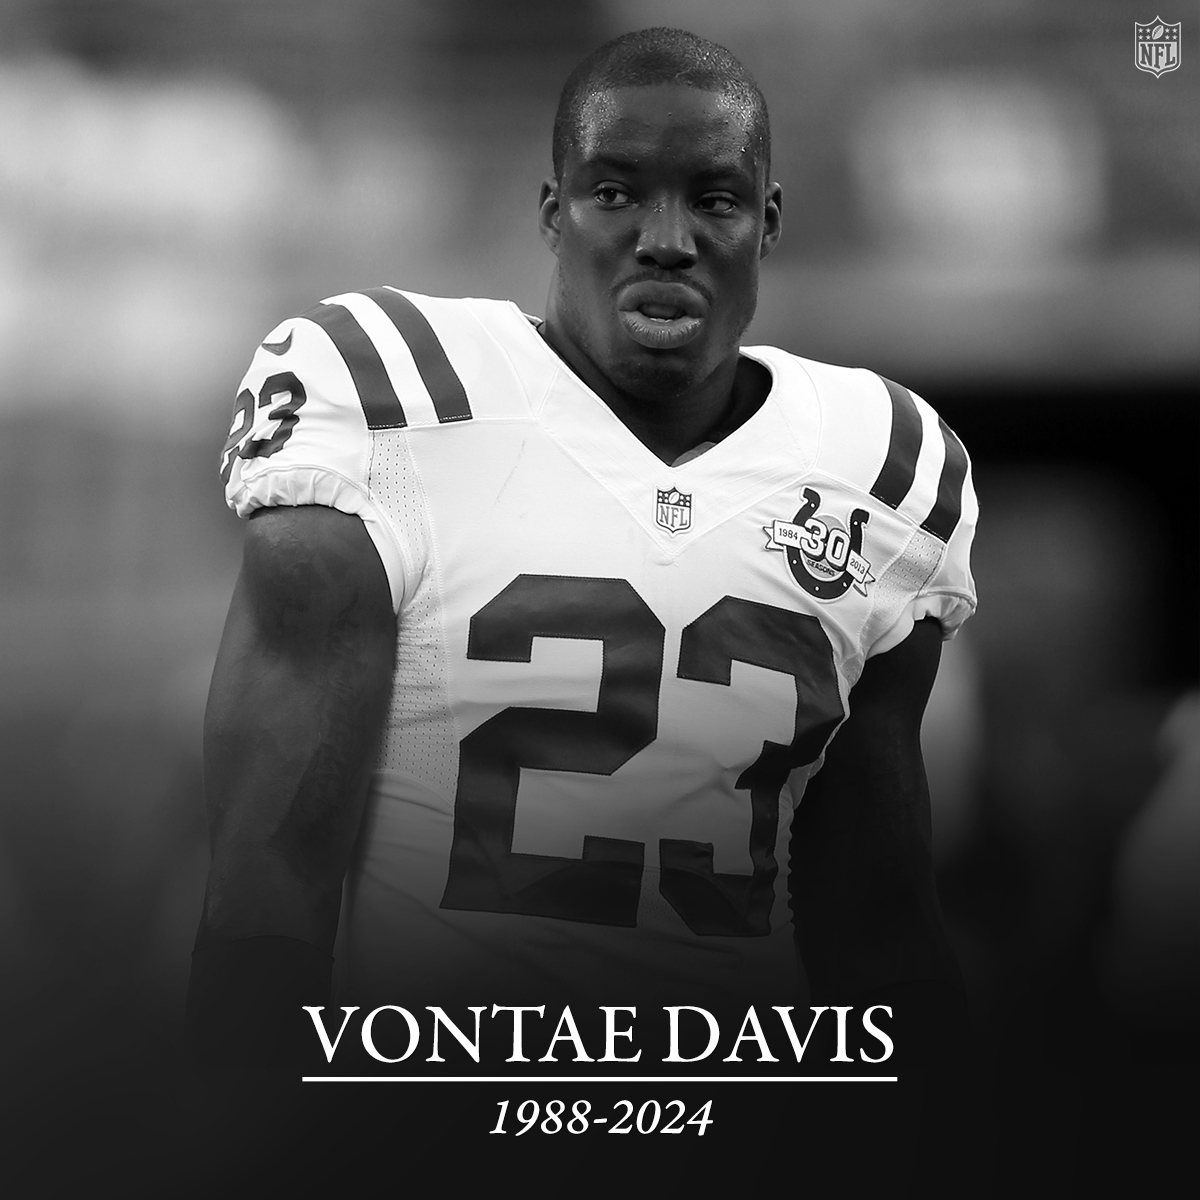 The NFL is heartbroken to hear about the passing of Vontae Davis. Our thoughts are with his family and loved ones. ❤️🕊️